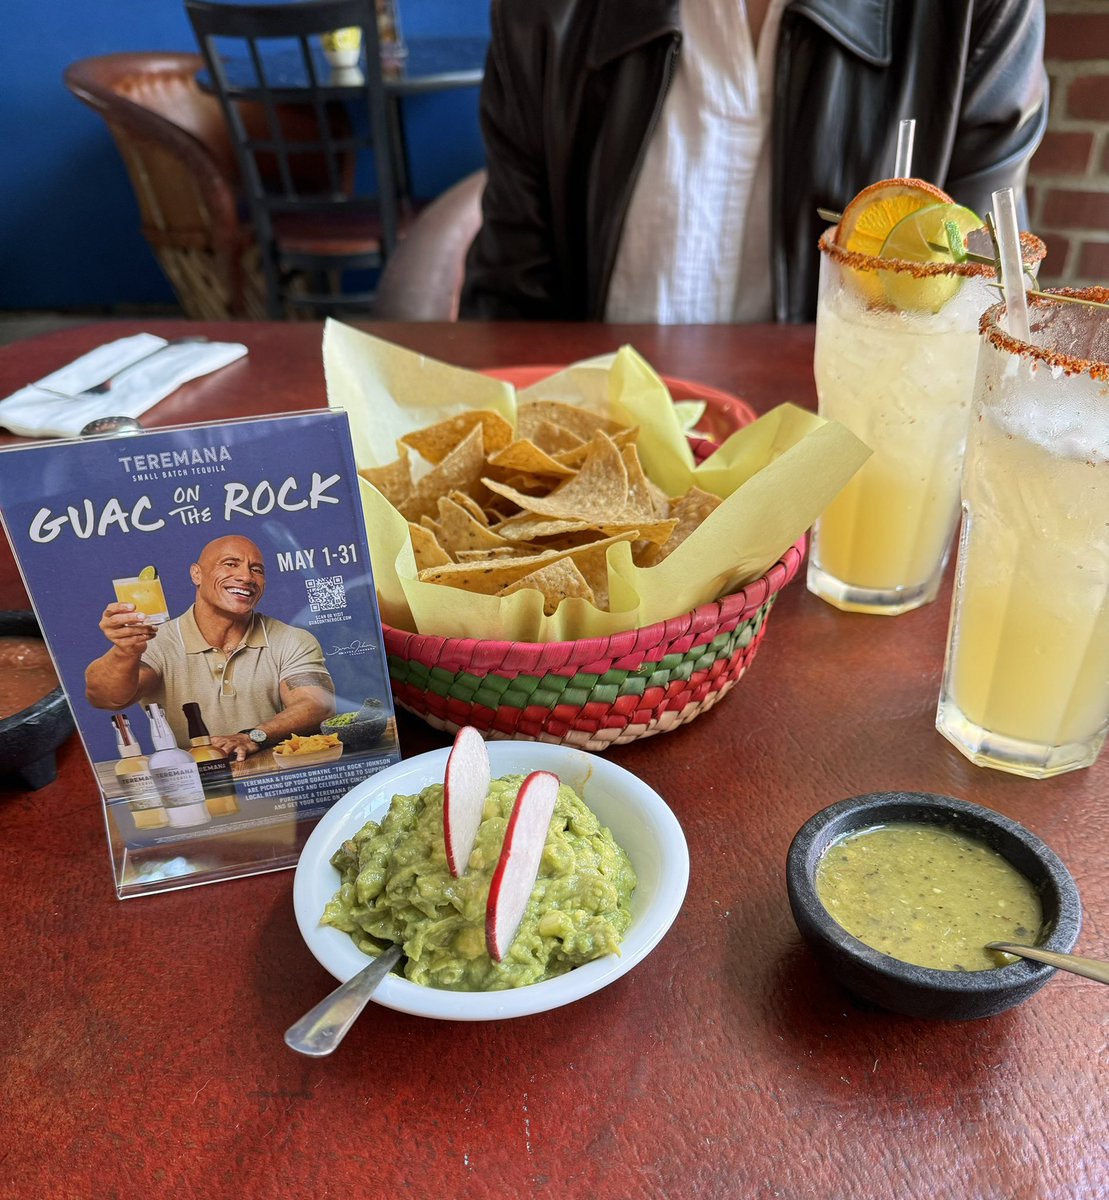 .@A7D Creative Group design team is in the final days of creative & print works for @Teremana Tequila’s “Guac on the Rock” Cinco de Mayo campaign! ✨🍹